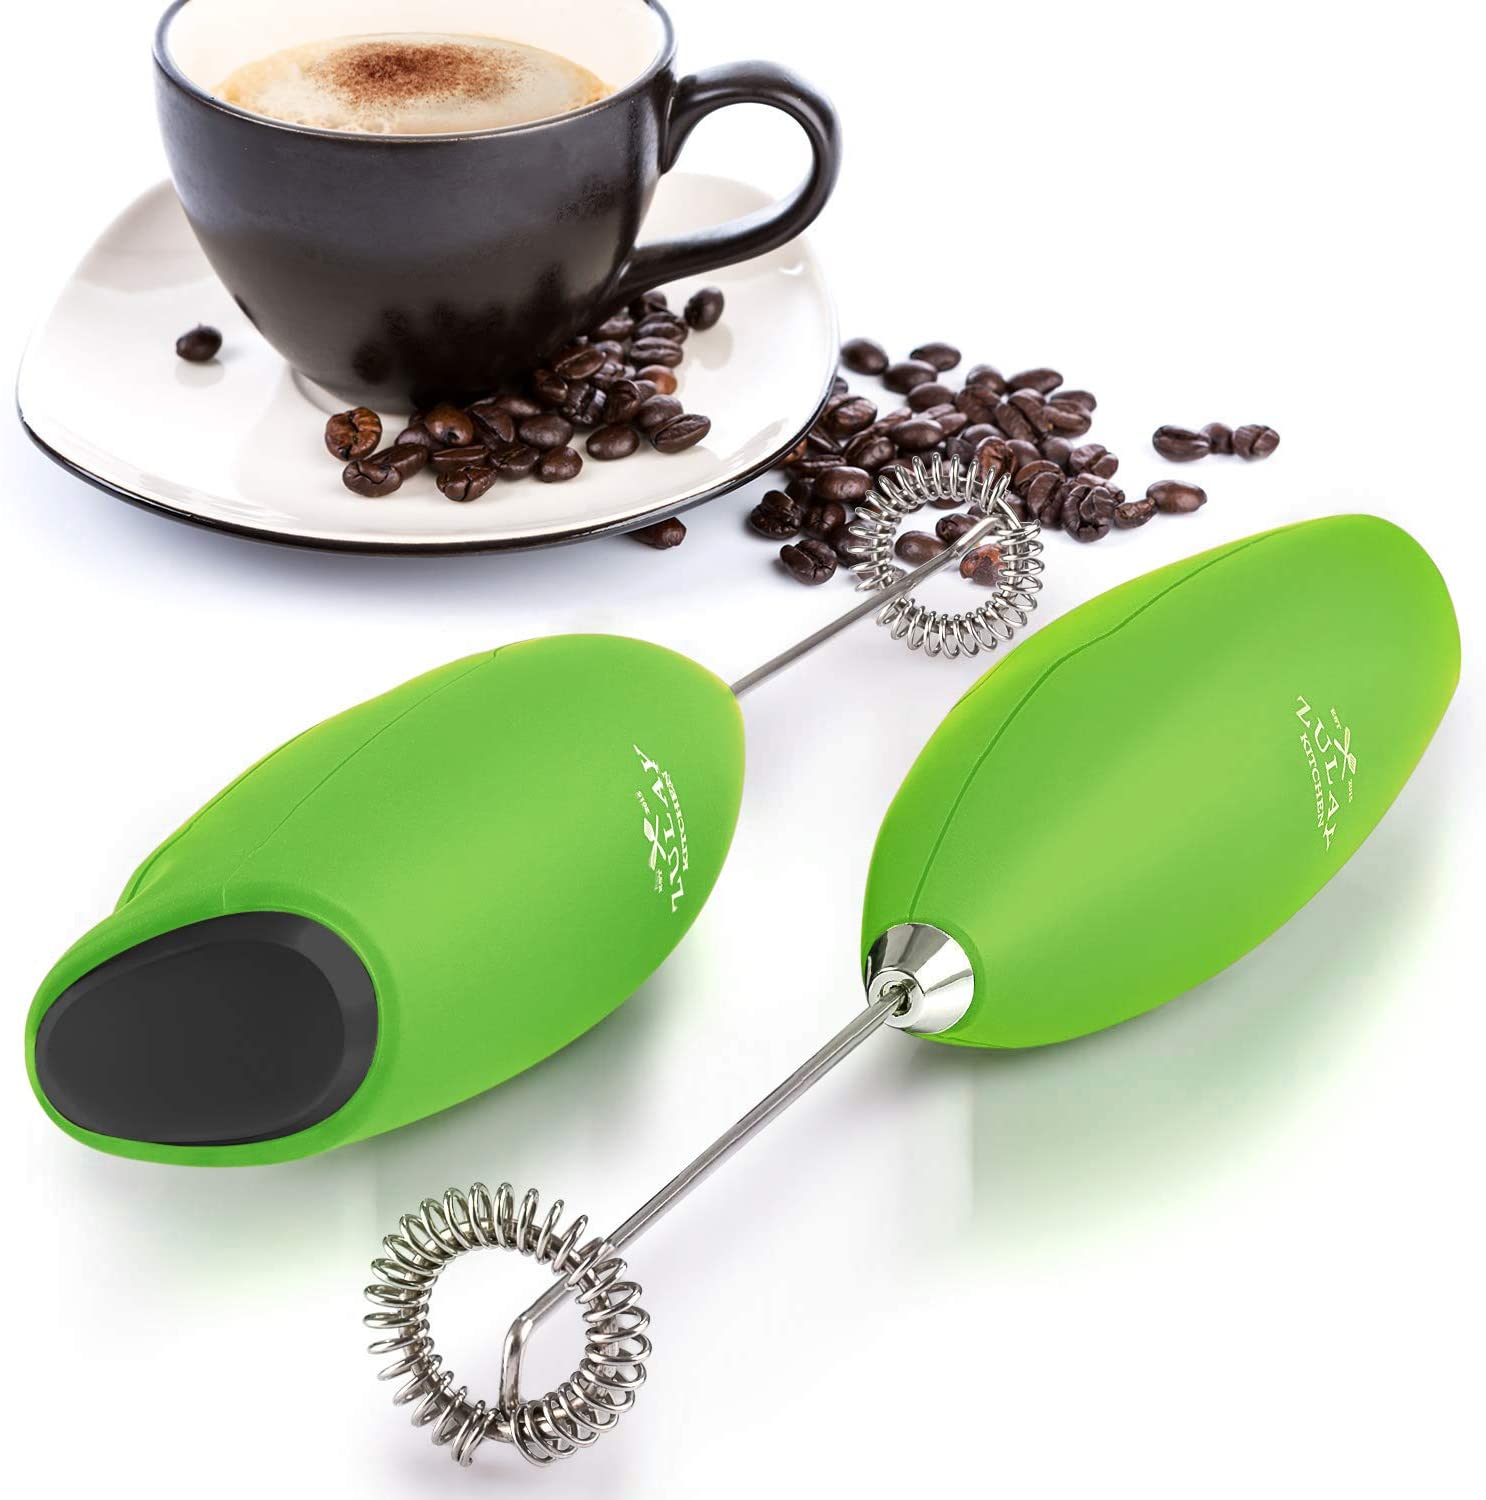 Zulay Kitchen Green Milk Frother OG w Stand - Plastic Milk Frother for  Whisking, Coffee, and More - Easy to Clean and Store - Powerful 13,000 RPM  Motor in the Coffee Maker